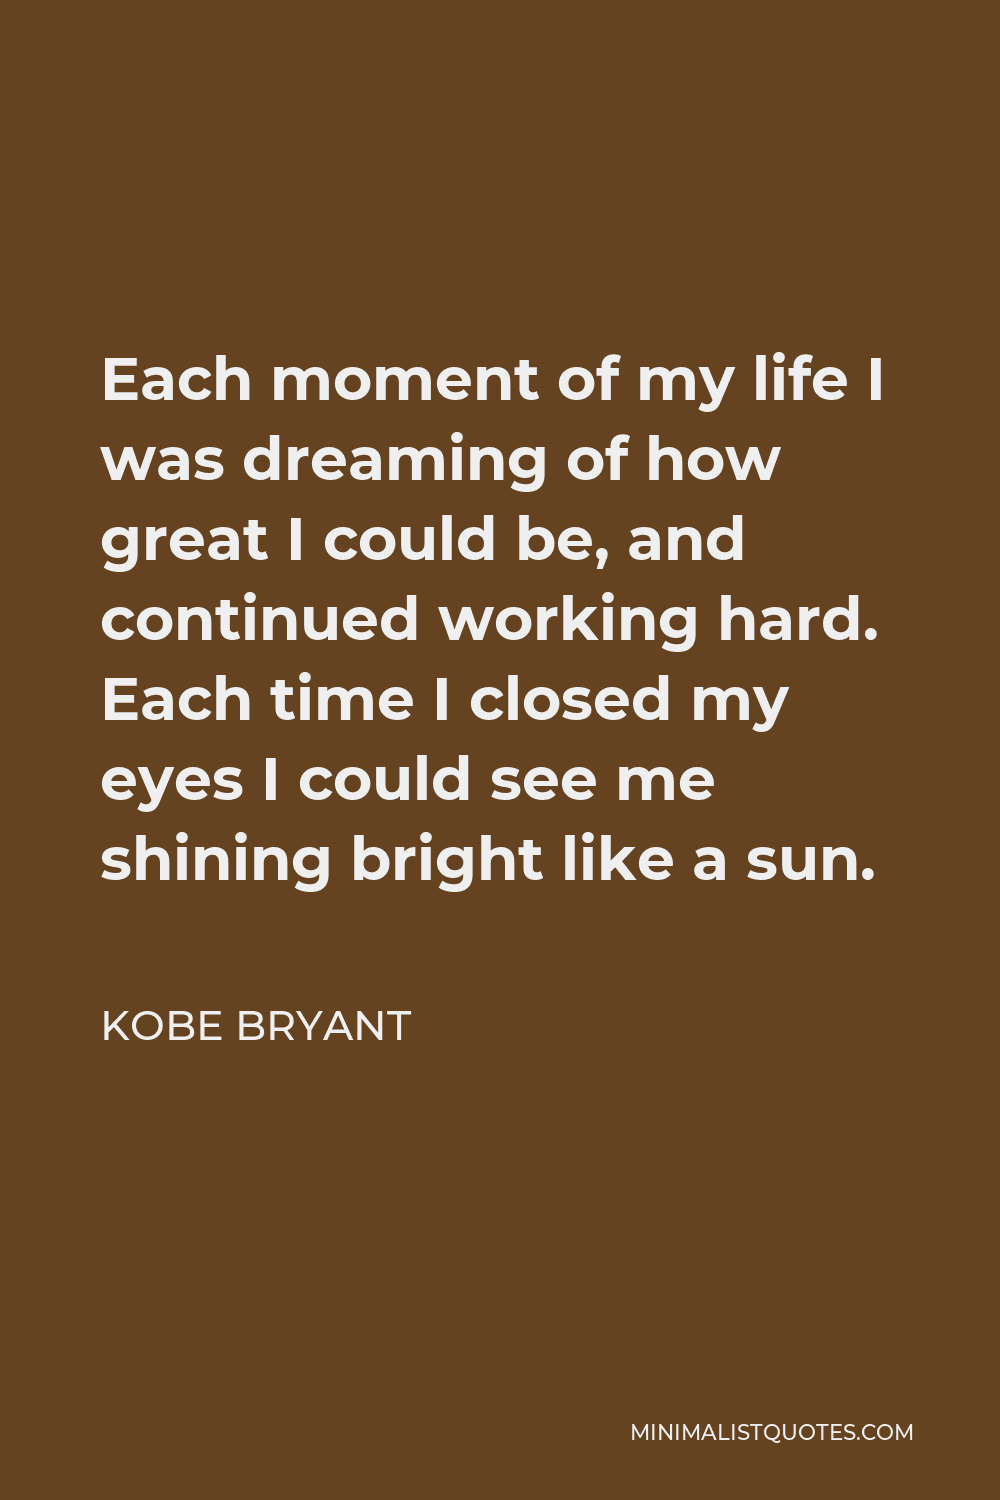 Kobe Bryant Quote - Each moment of my life I was dreaming of how great I could be, and continued working hard. Each time I closed my eyes I could see me shining bright like a sun.